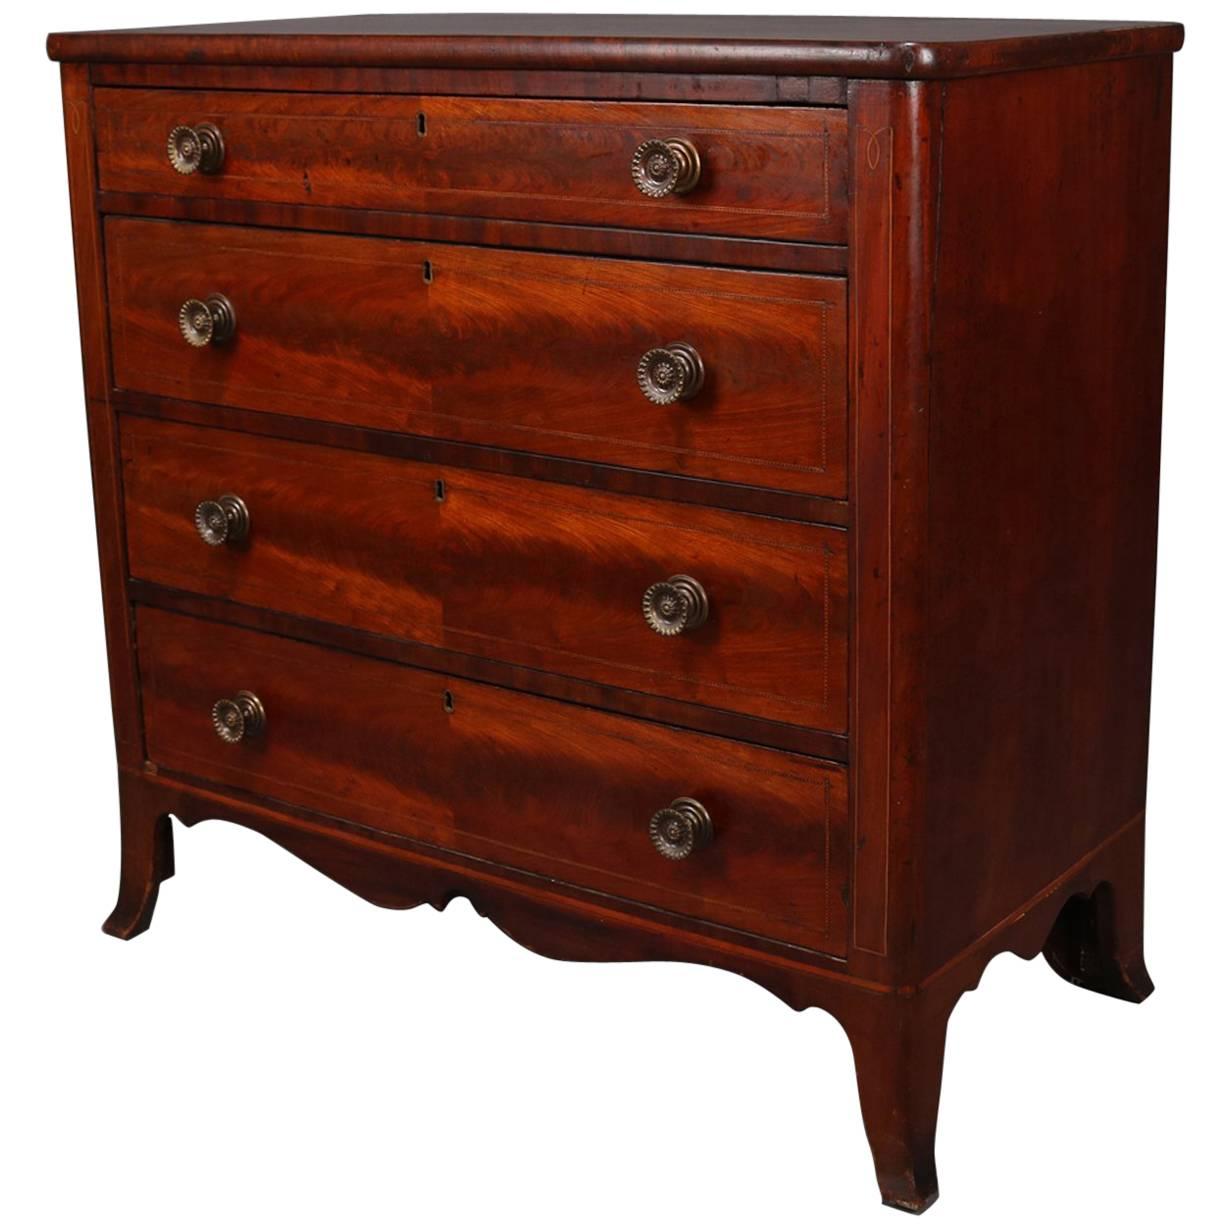 Antique English Hepplewhite Inlay Banded Flame Mahogany Chest of Drawers